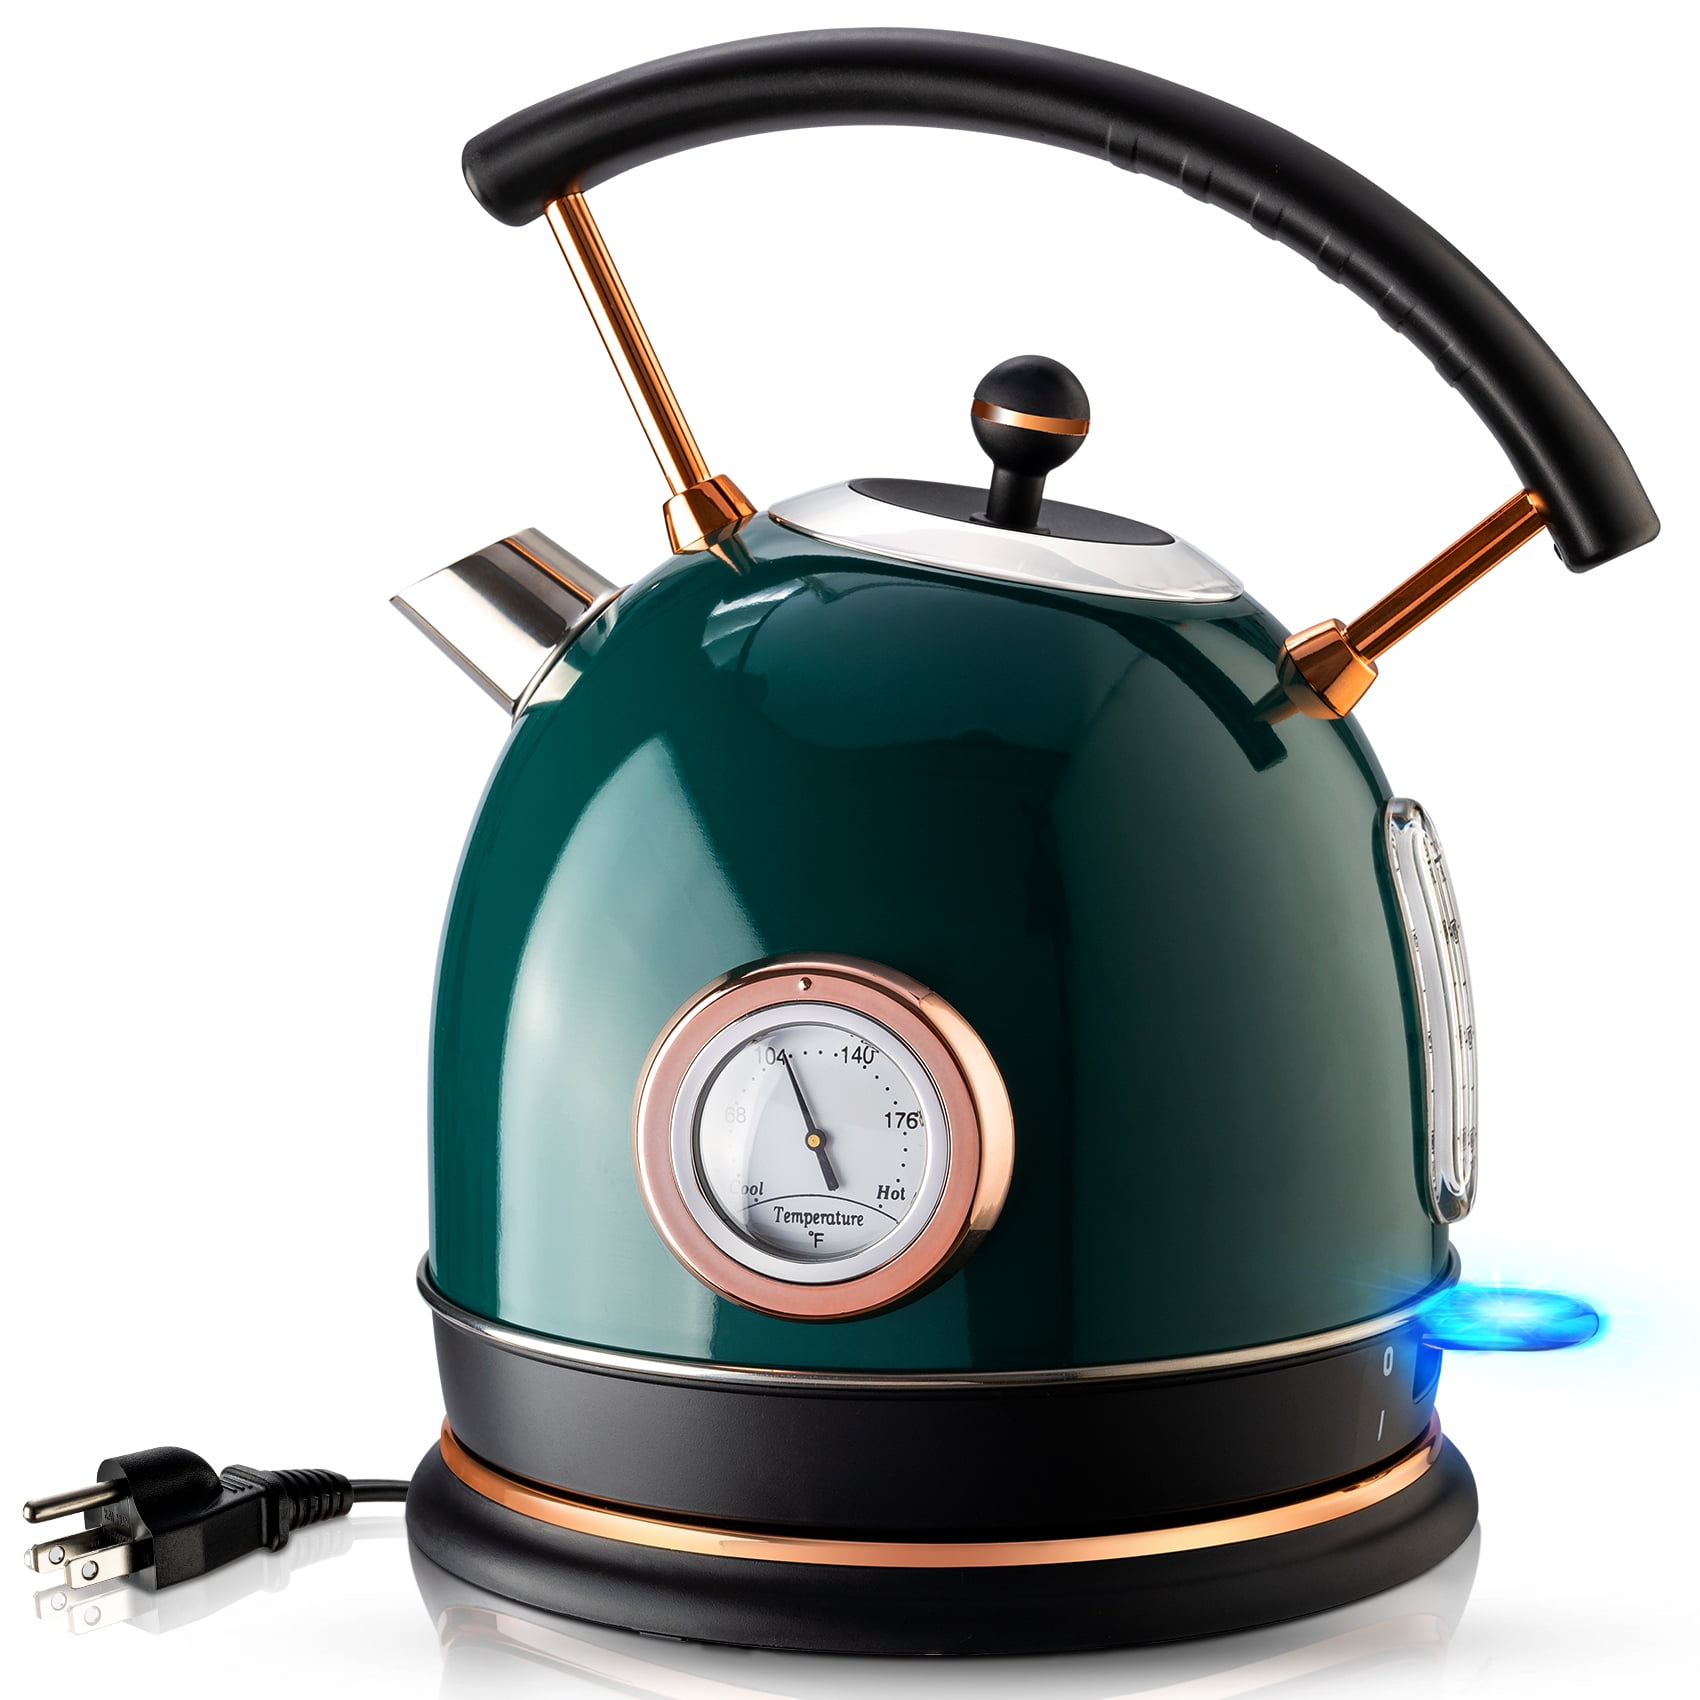 Pukomc Electric Kettle Temperature Control with 4 Presets, Keep Warm 1.7L  Electric Tea Kettle & Hot Water Boiler, Auto-Off & Boil-Dry Protection, BPA